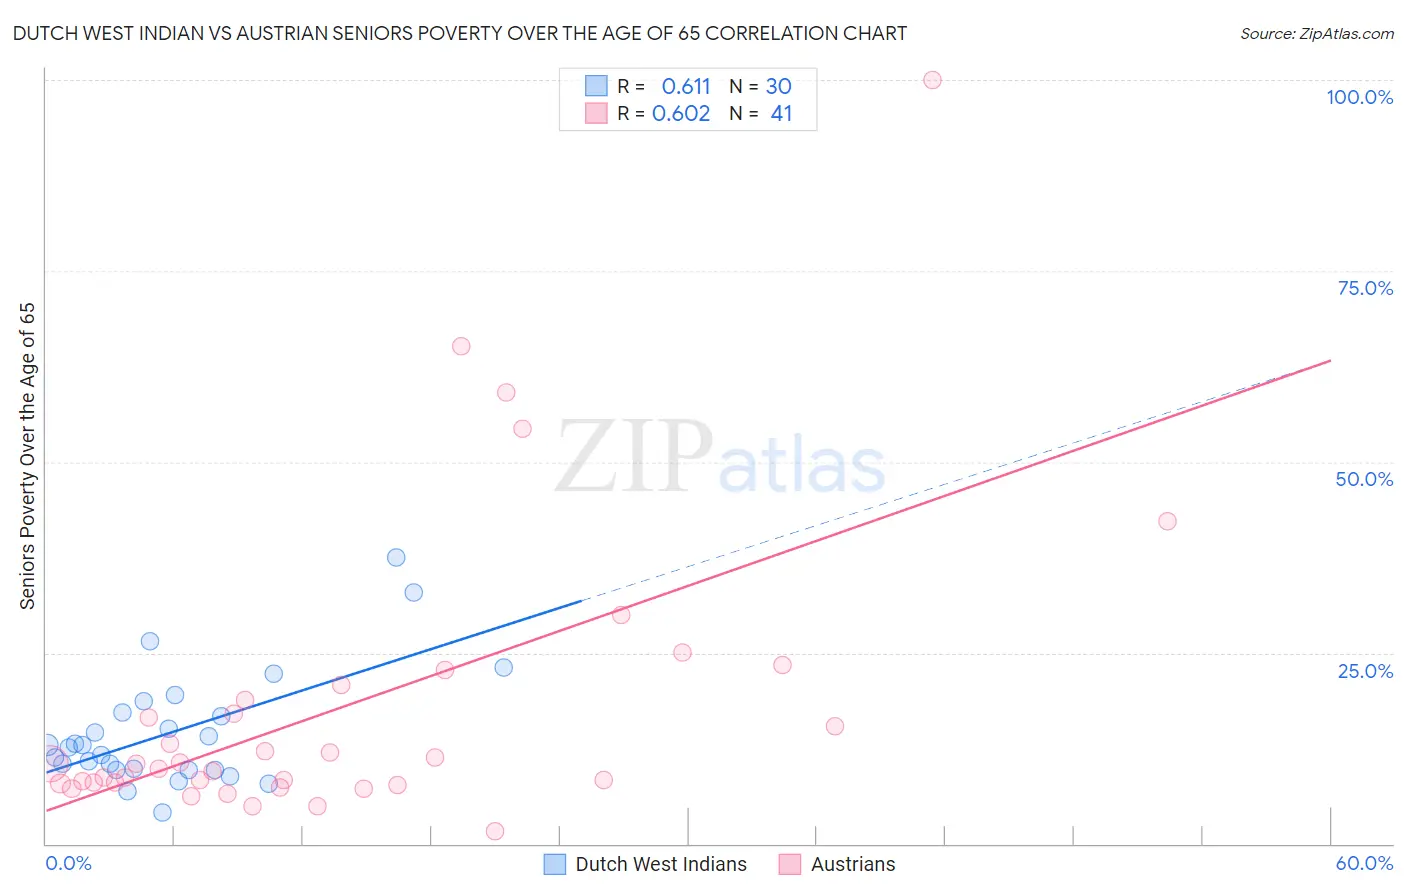 Dutch West Indian vs Austrian Seniors Poverty Over the Age of 65